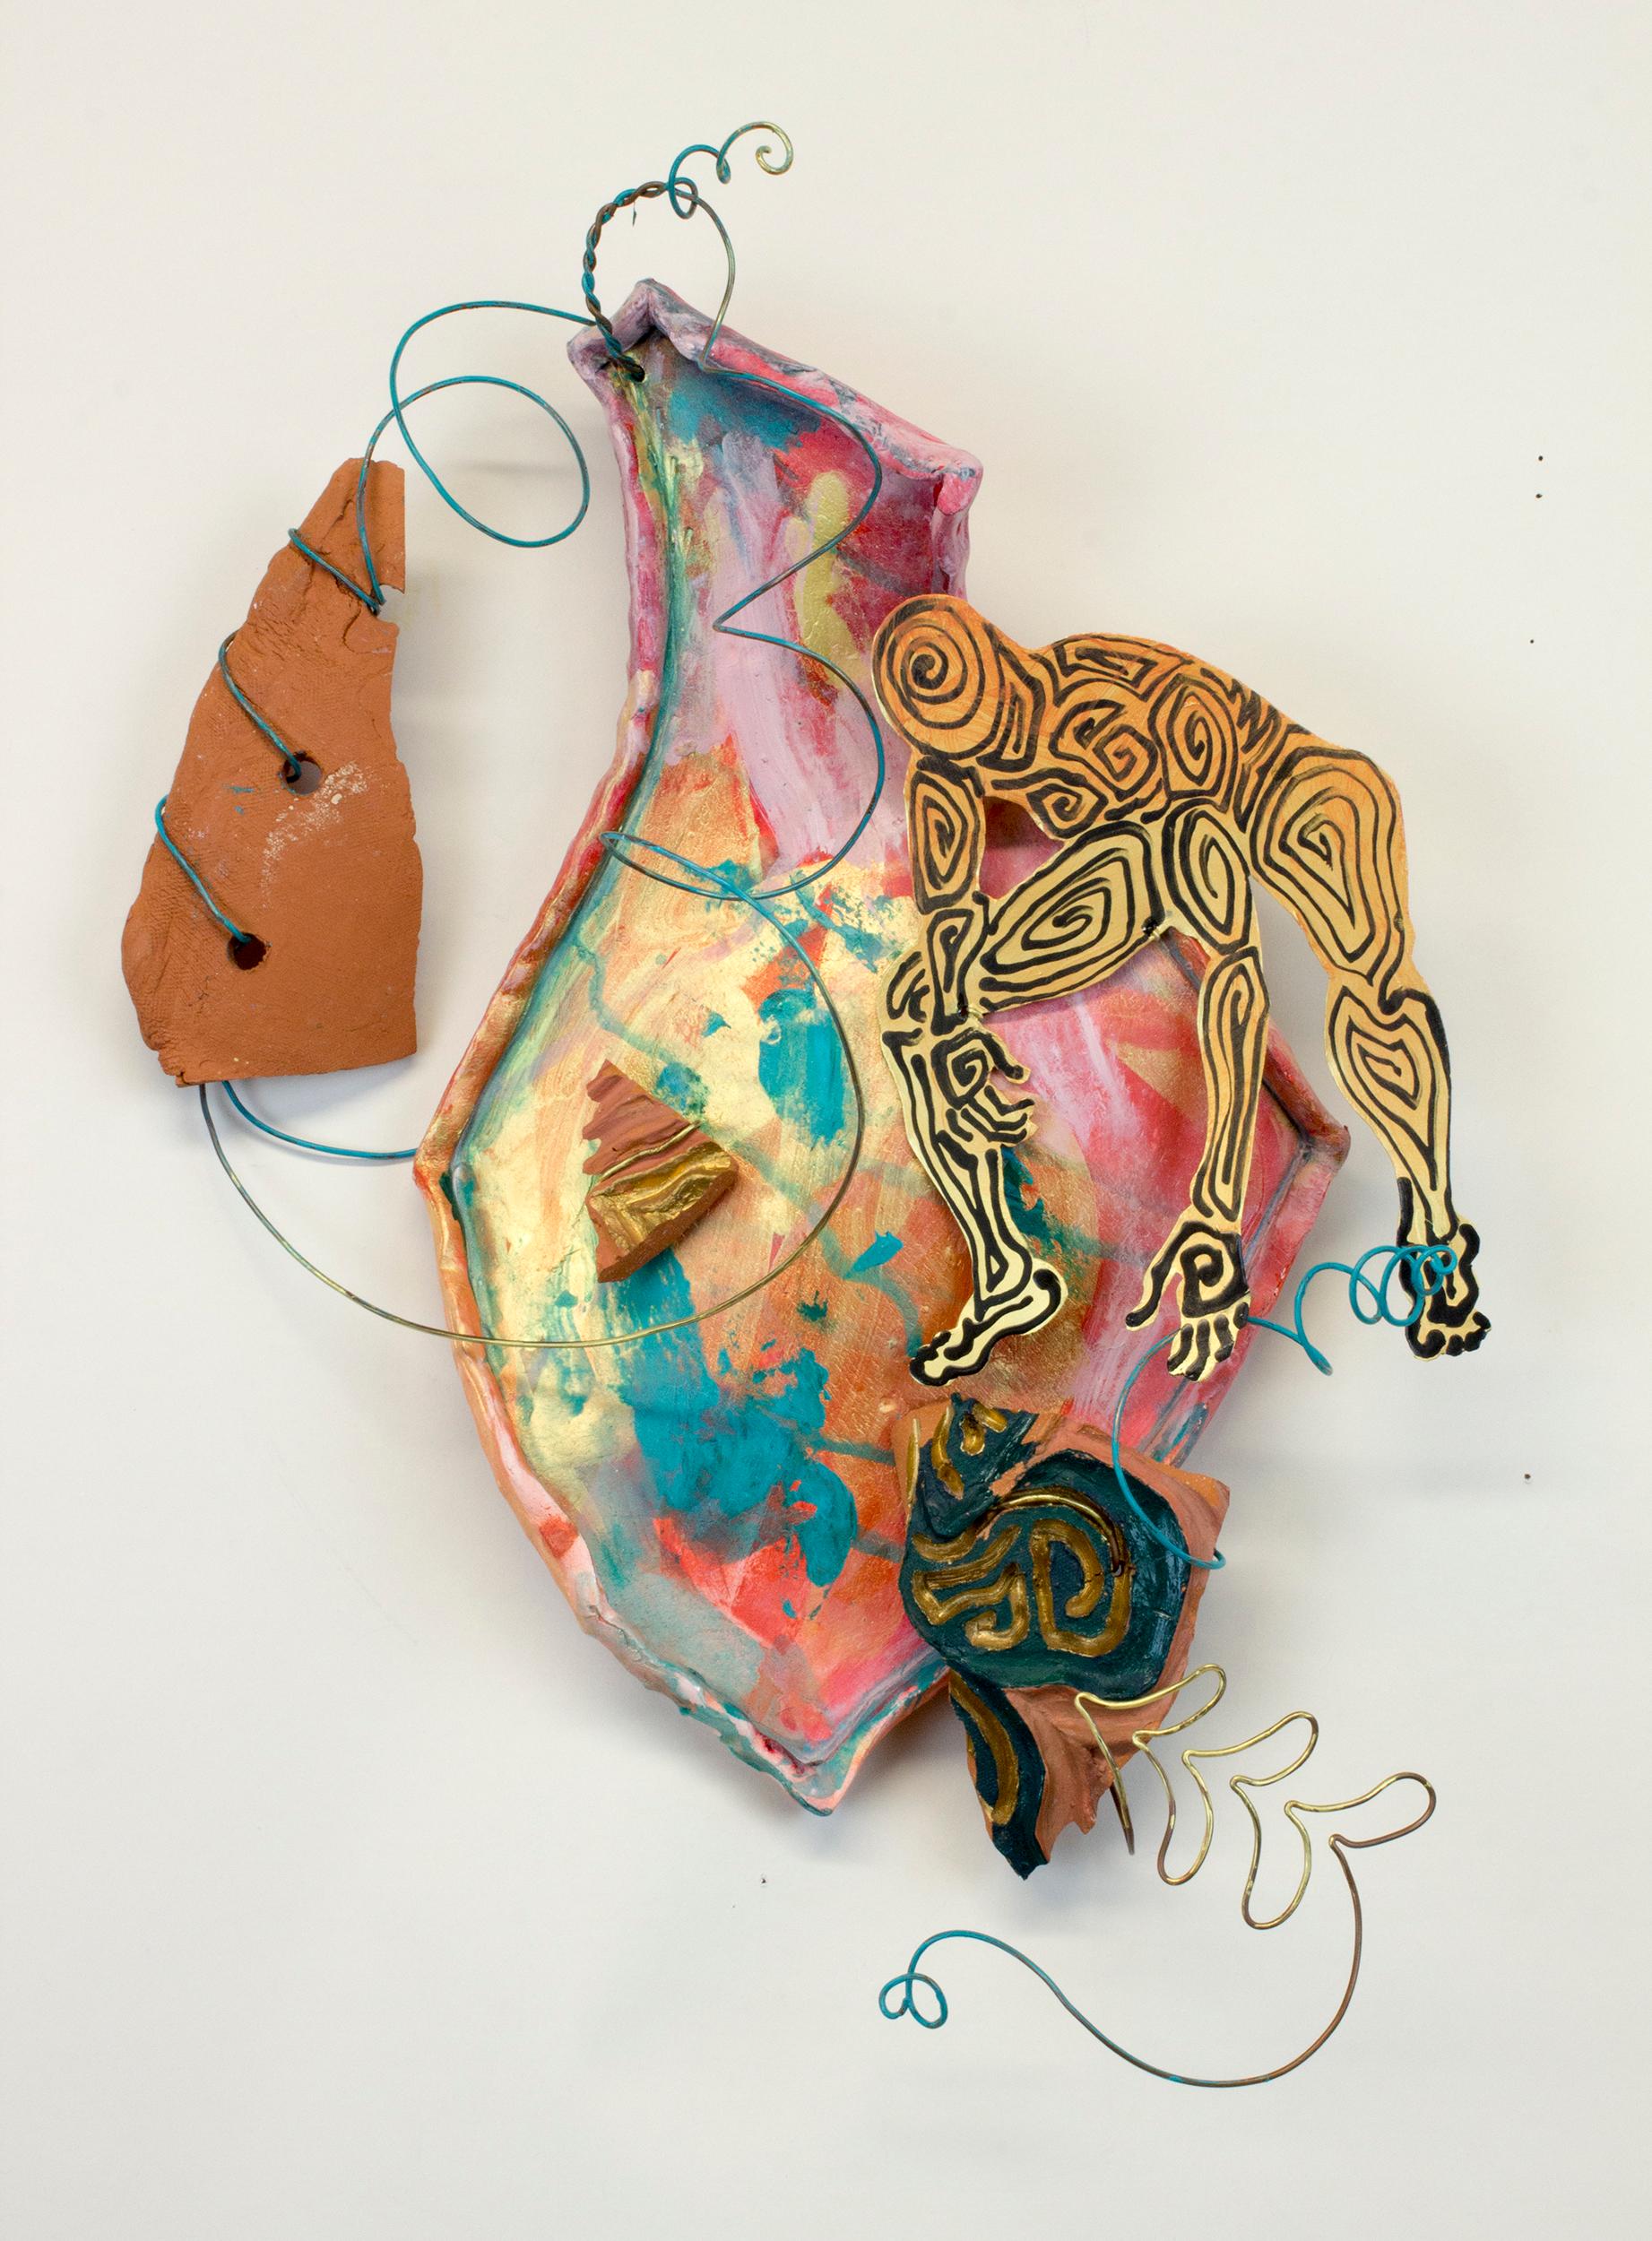 "Illogical Sequence", contemporary, pink, gold, green, teal, metal, sculpture